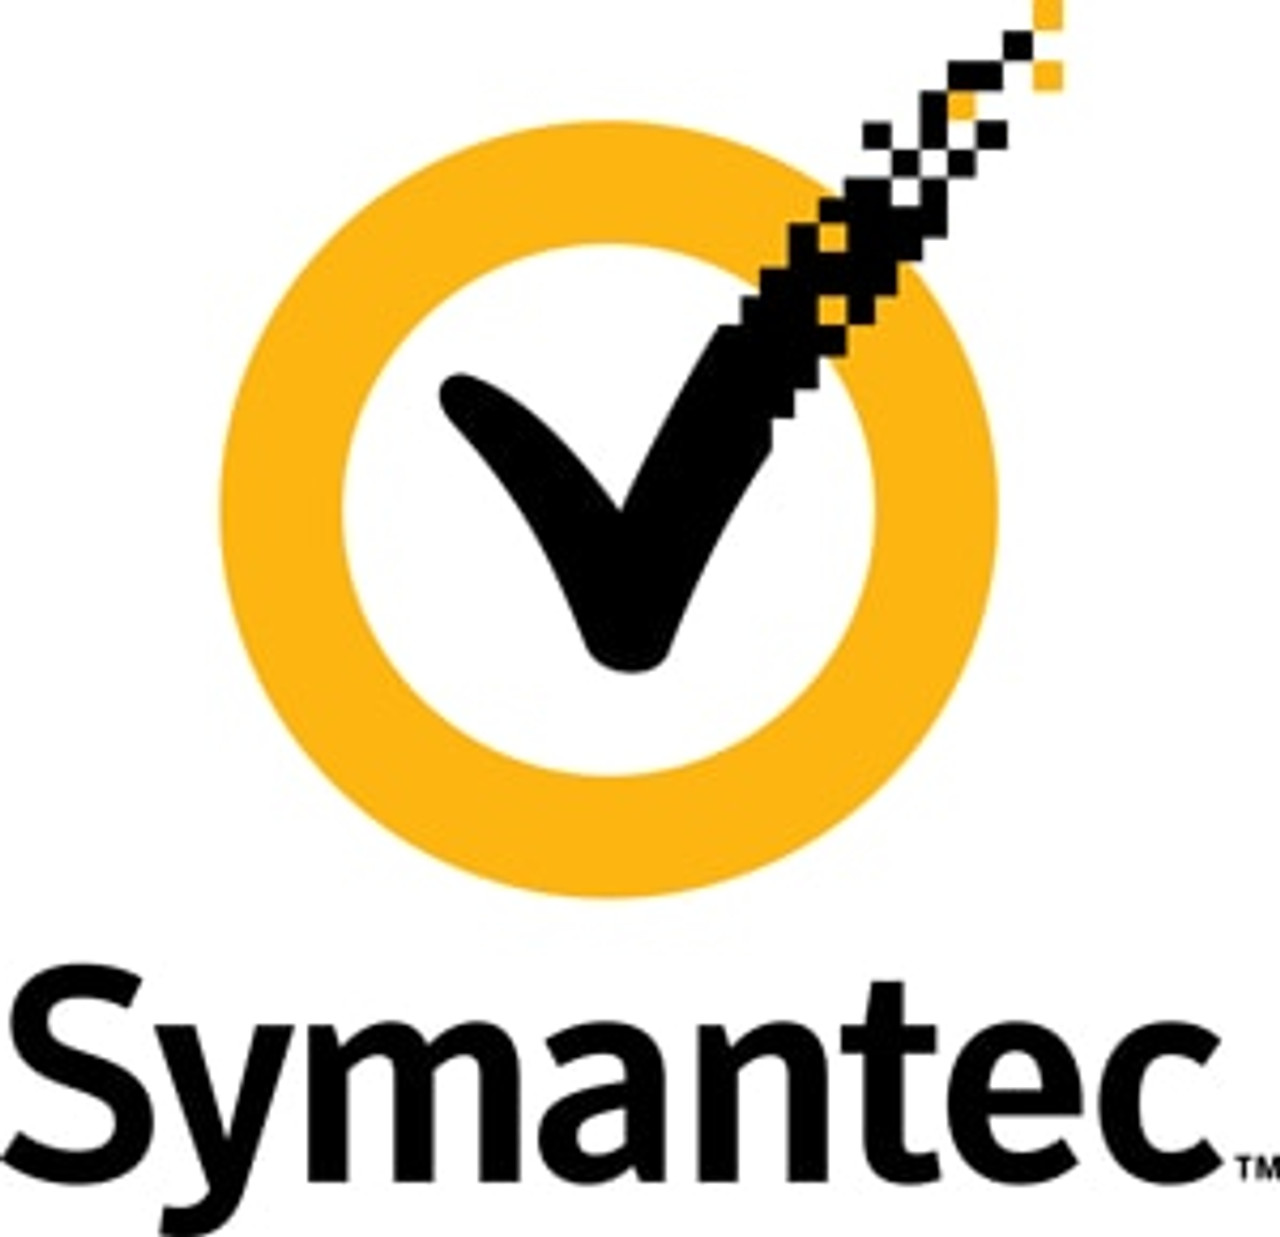 Symantec Endpoint Protection with Endpoint Detection and Response, Additional Quantity Subscription License with Support, 25-49 Devices 1 YR